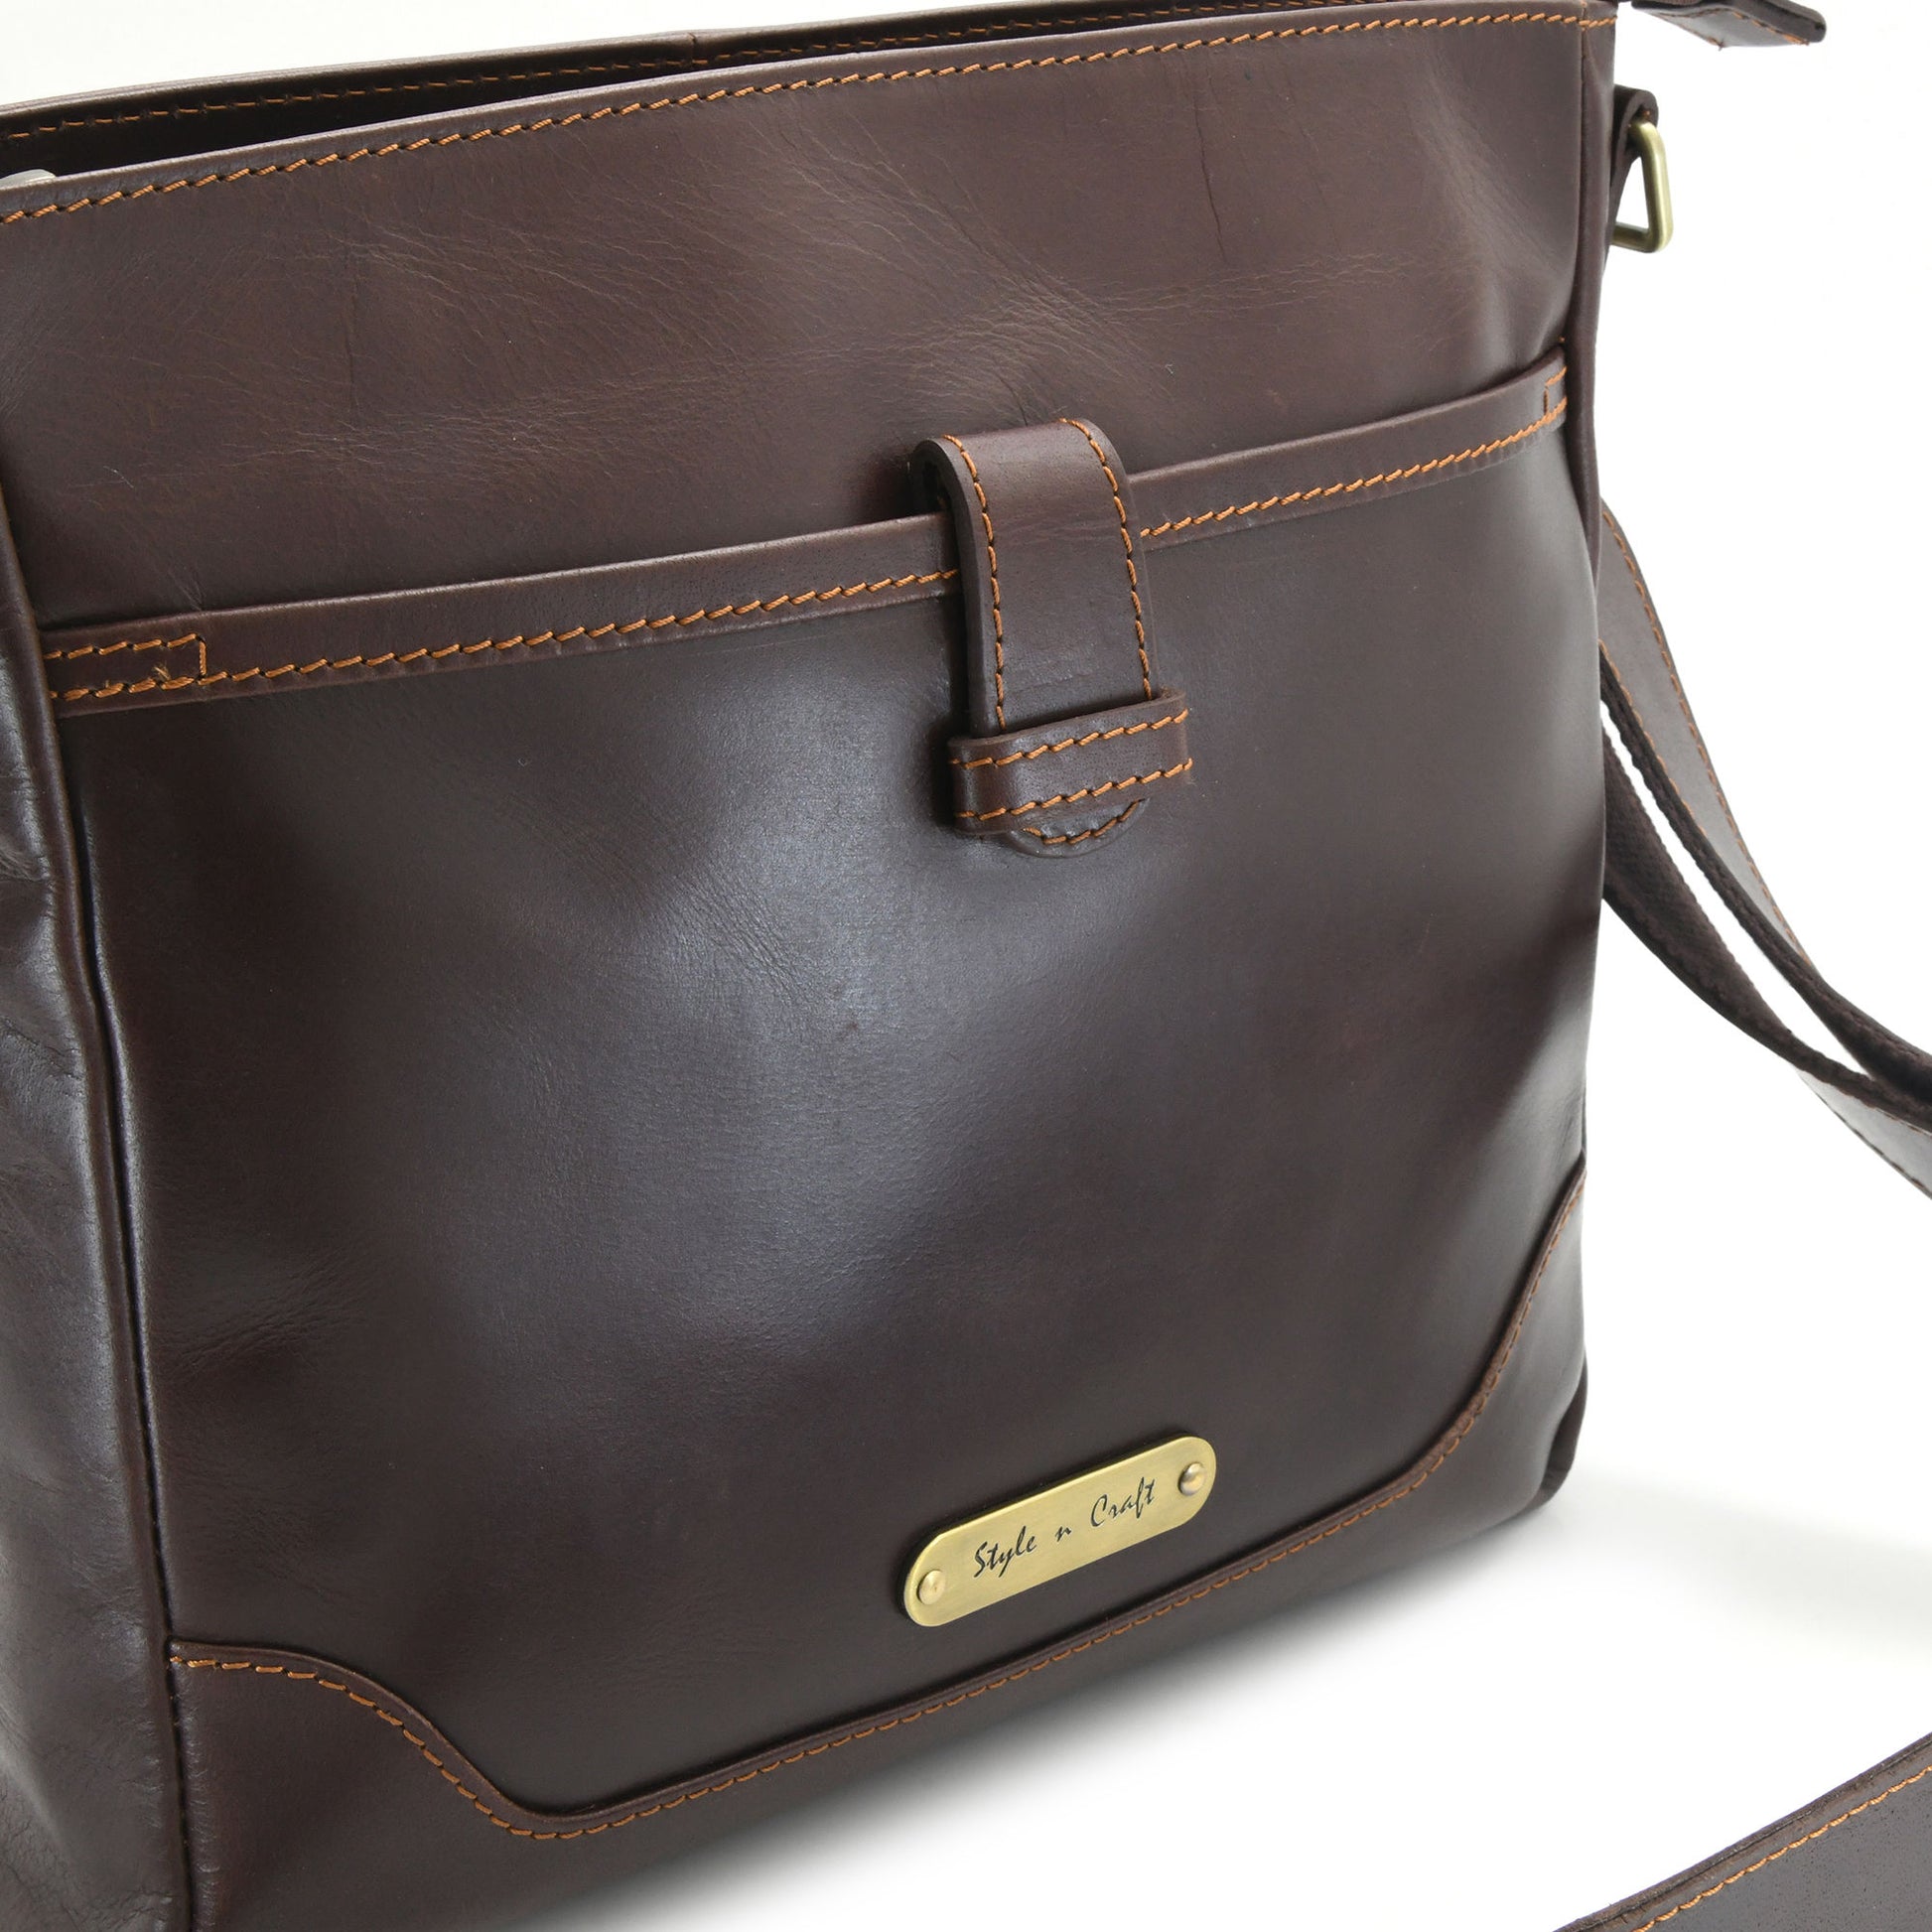 Style n Craft 392001 Cross-body Messenger Bag in Full Grain Dark Brown Leather - Front Profile View showing the Front Pocket and Logo